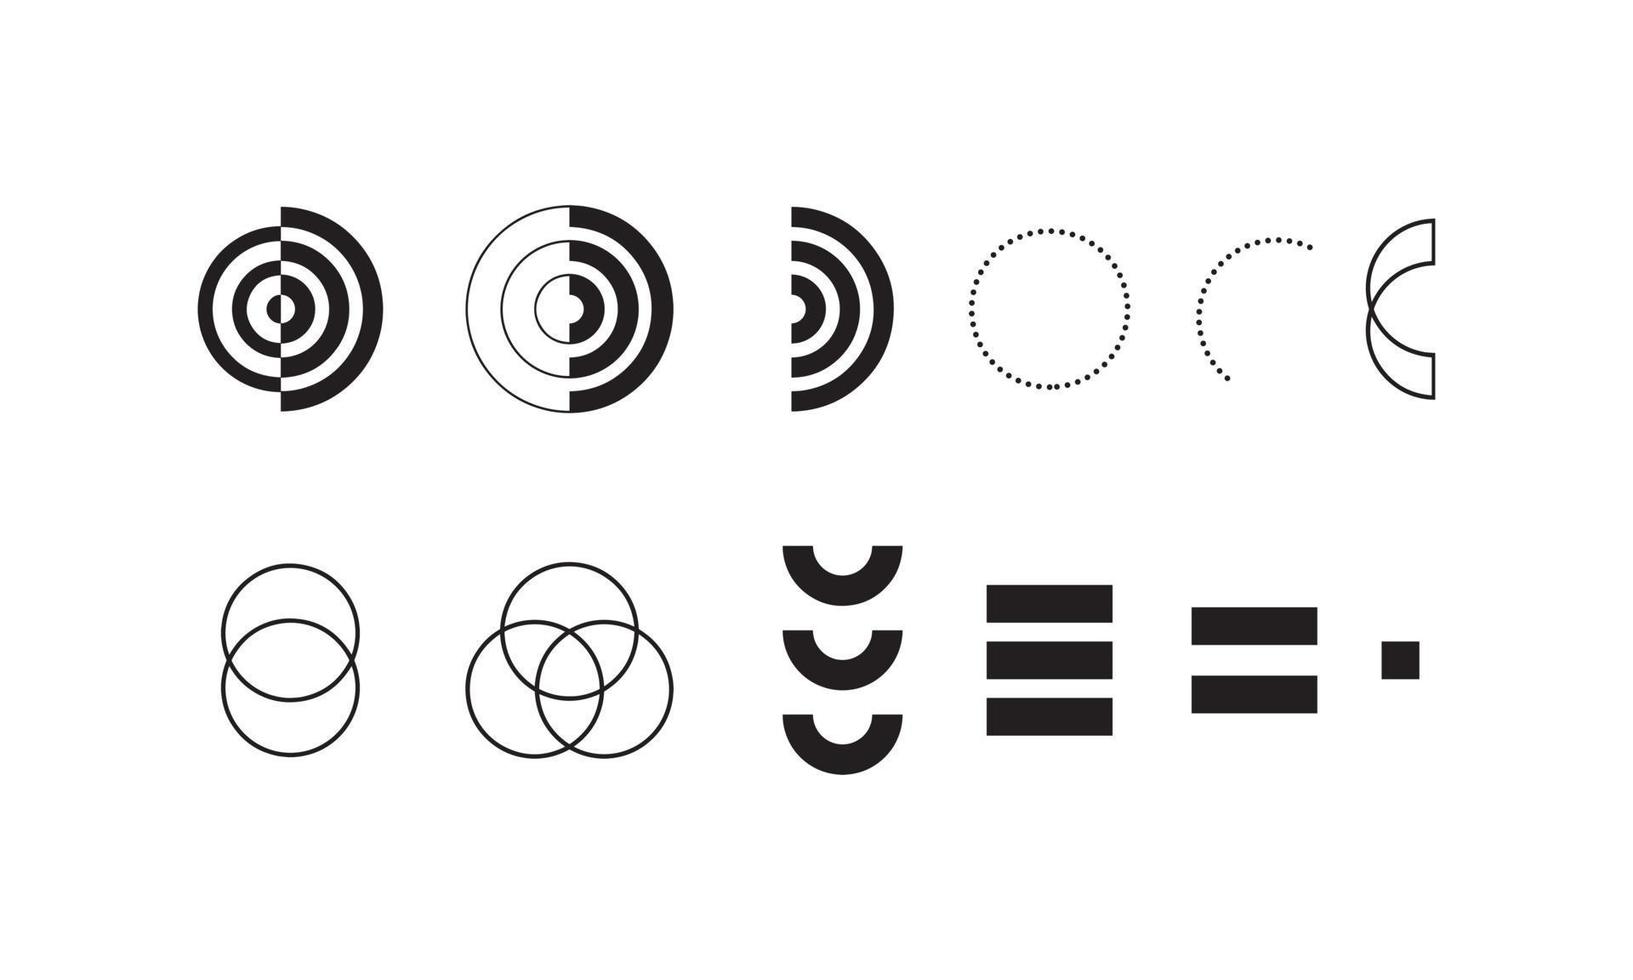 set of circle designs for icons and symbols. Vector circles for trendy and future design elements